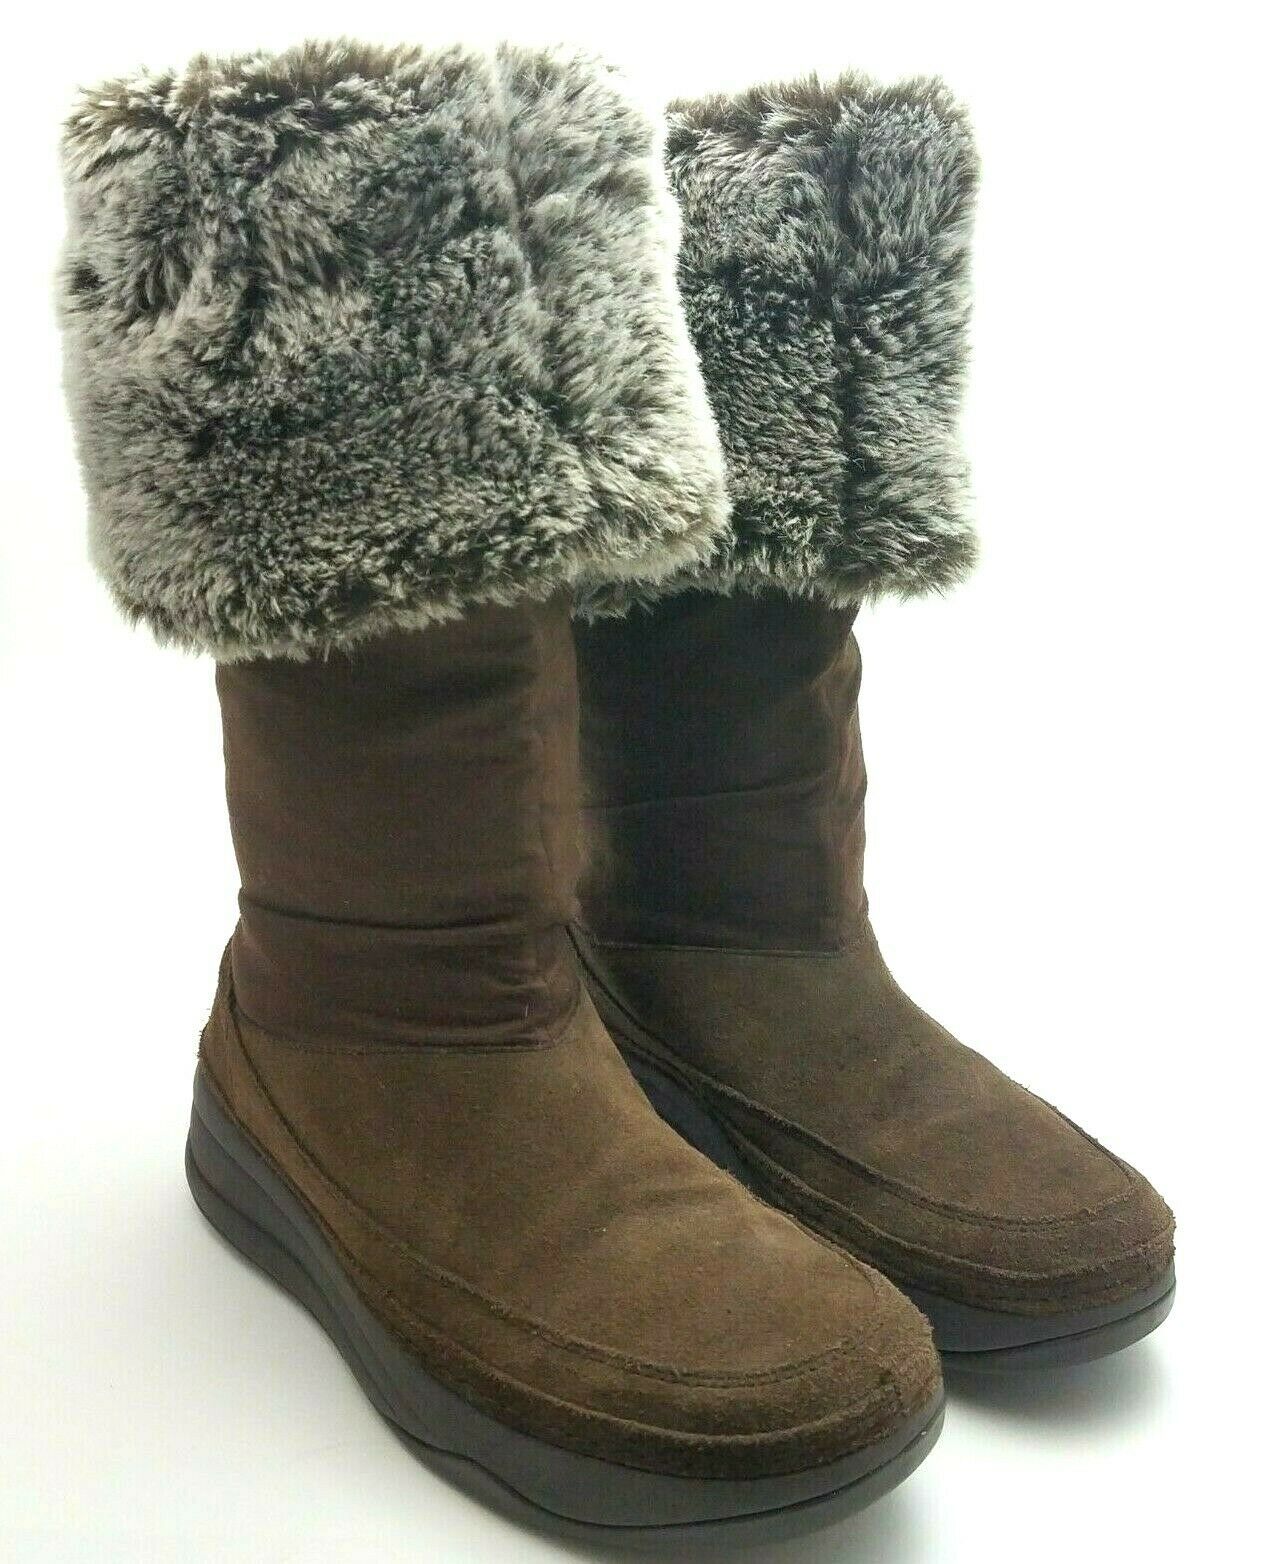 skechers chocolate suede faux fur mid calf boots